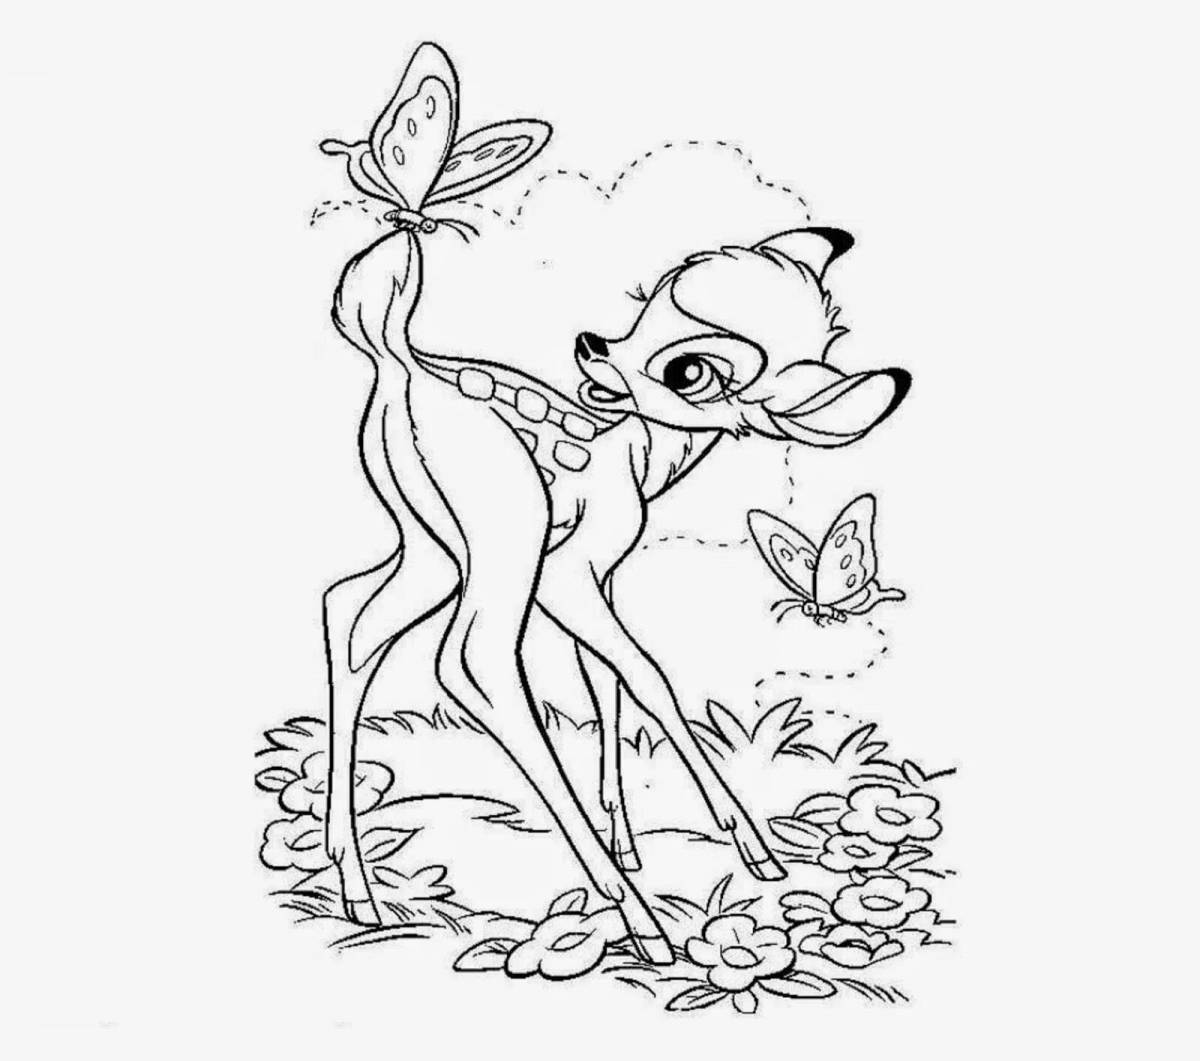 Violent bambi coloring book for 3-4 year olds